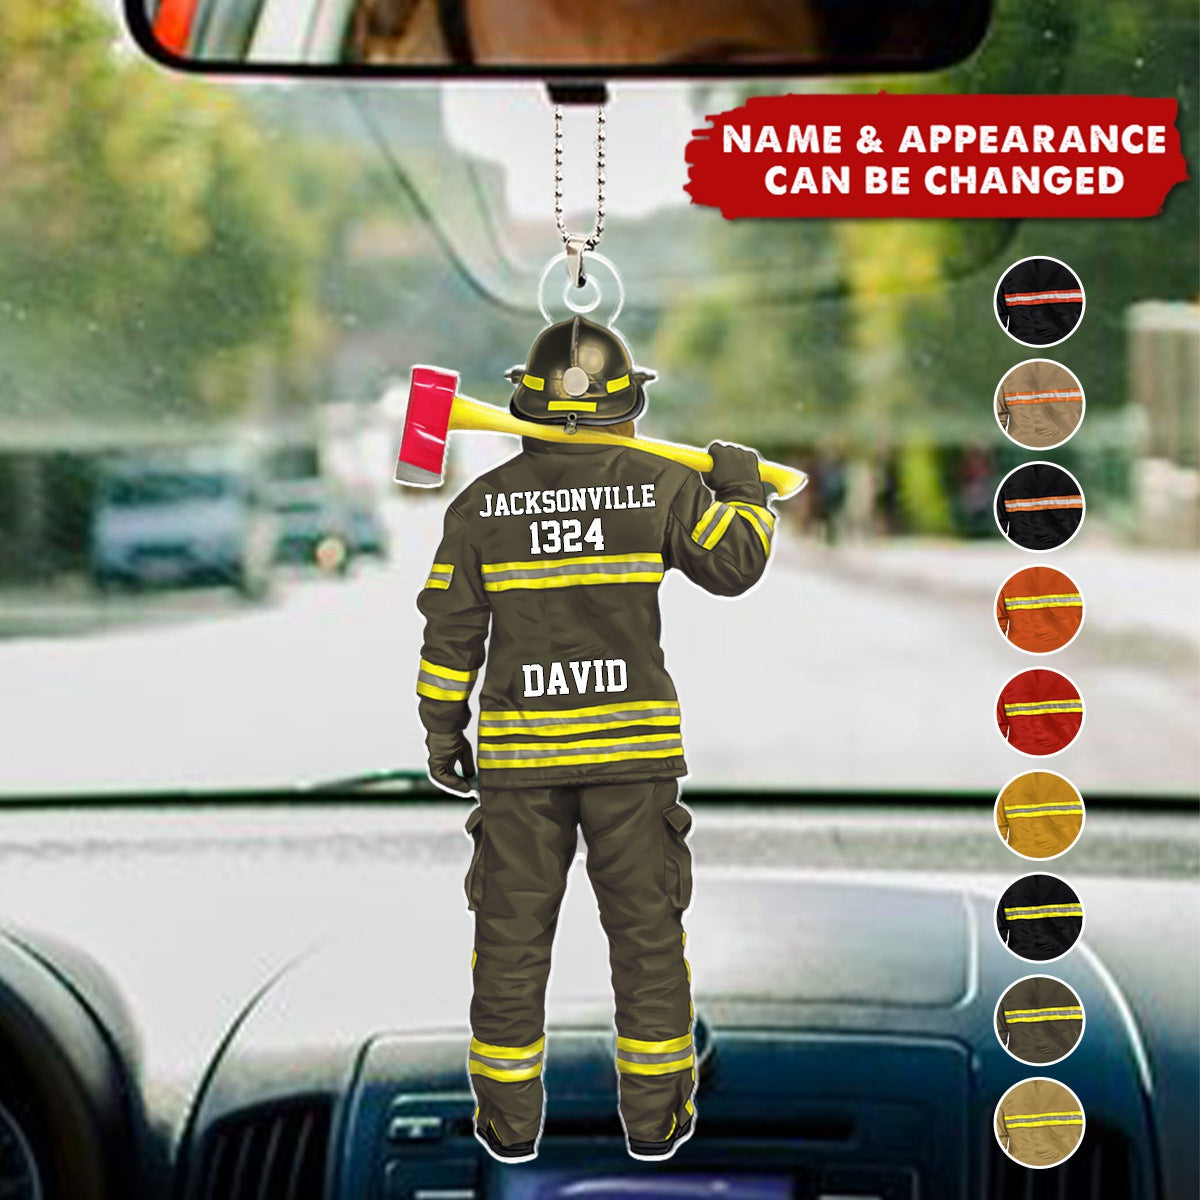 Firefighter Uniform - Gift For Firefighters - Personalized Car Ornament